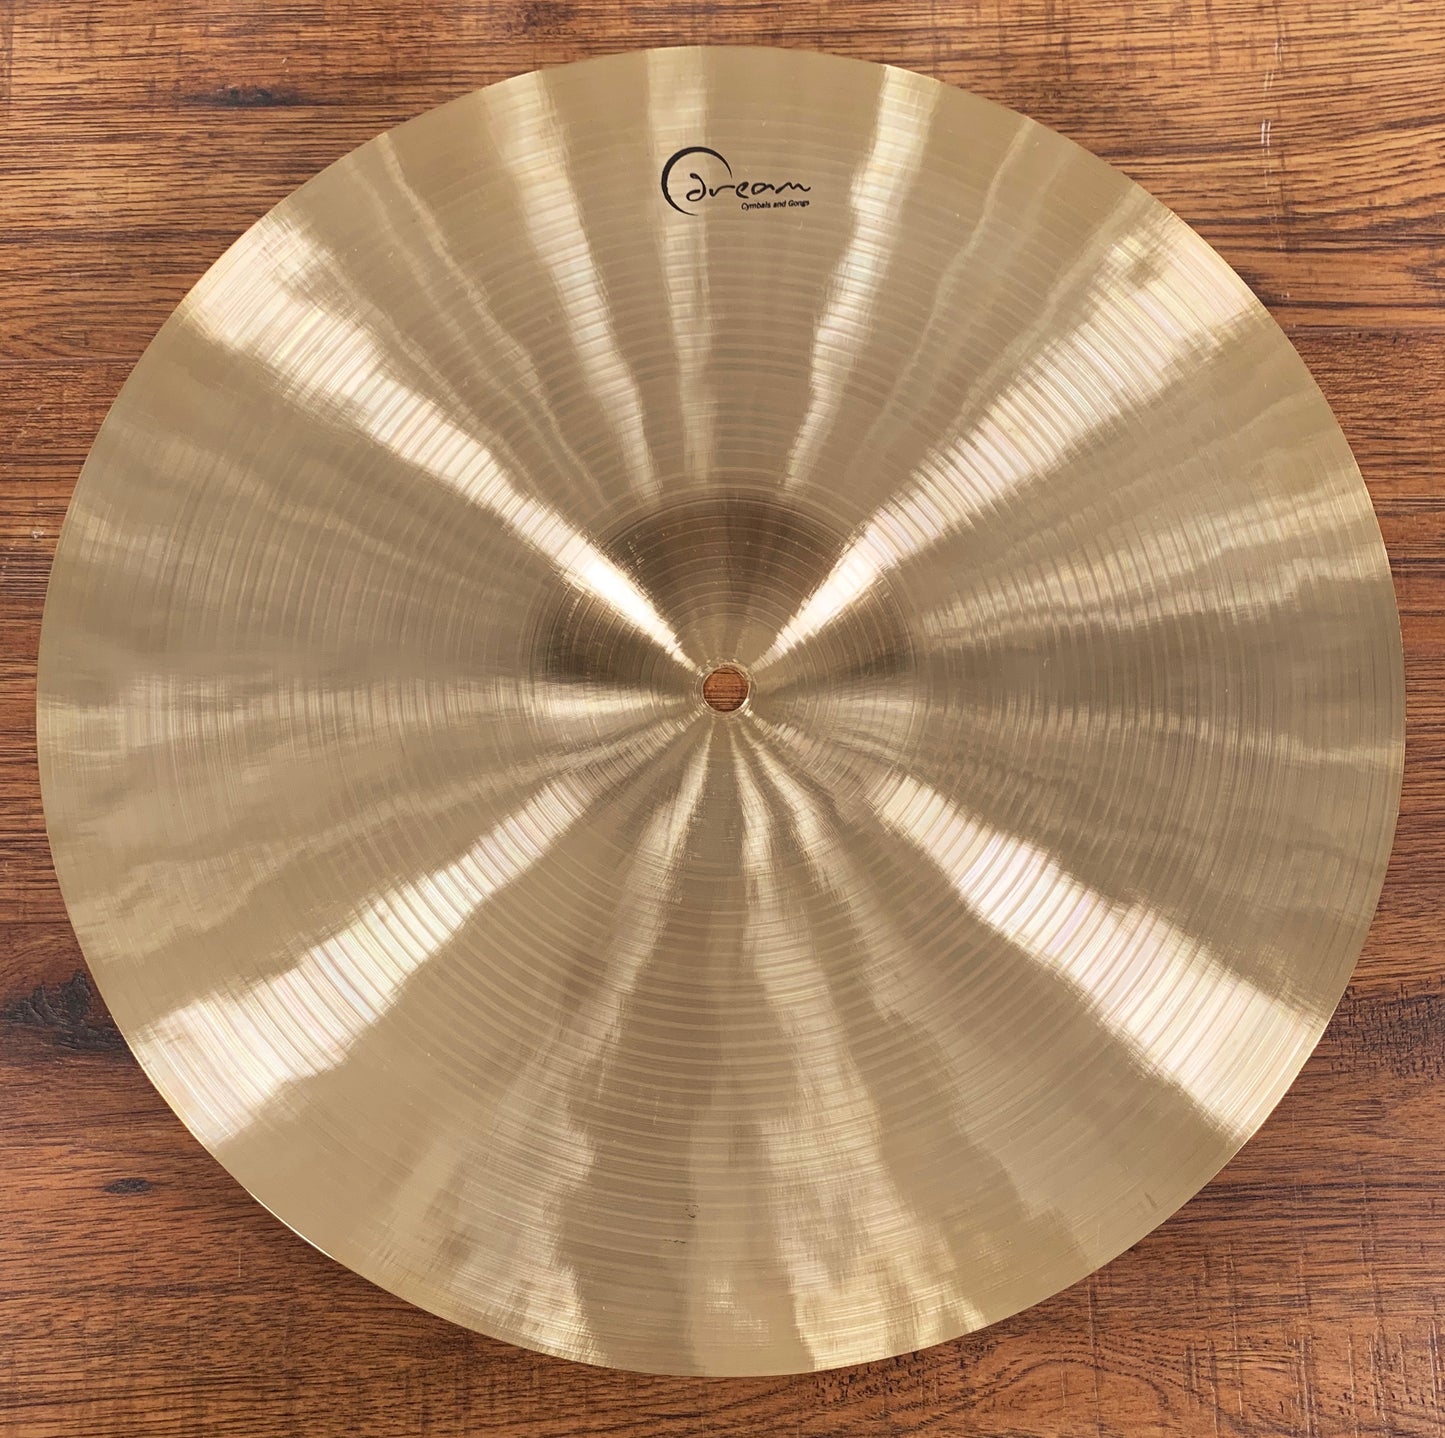 Dream Cymbals C-HH14 Contact Series Hand Forged & Hammered 14" Hi Hat Set Demo